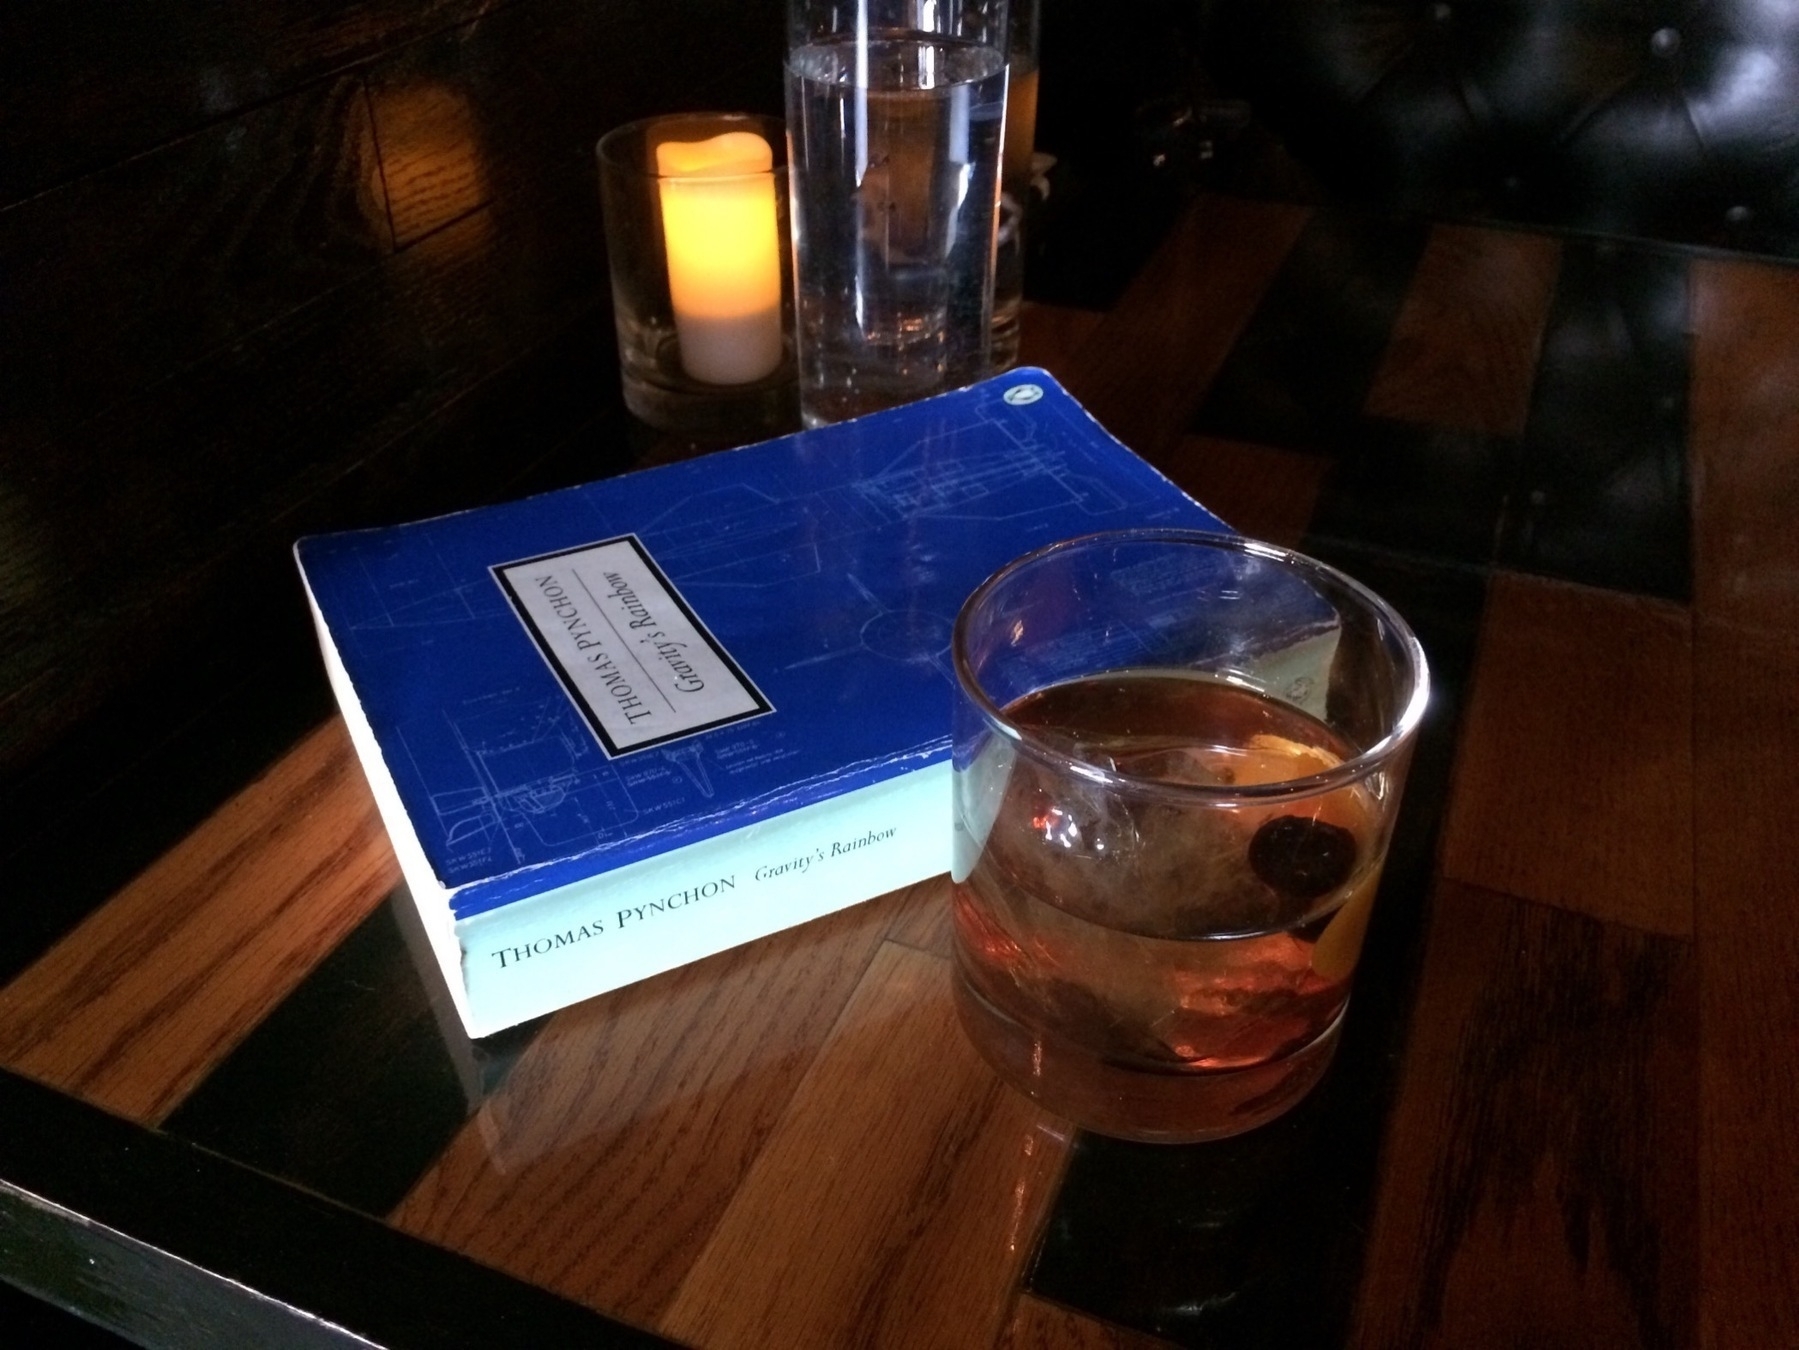 A copy of Gravity's Rainbow beside an Old Fashioned cocktail